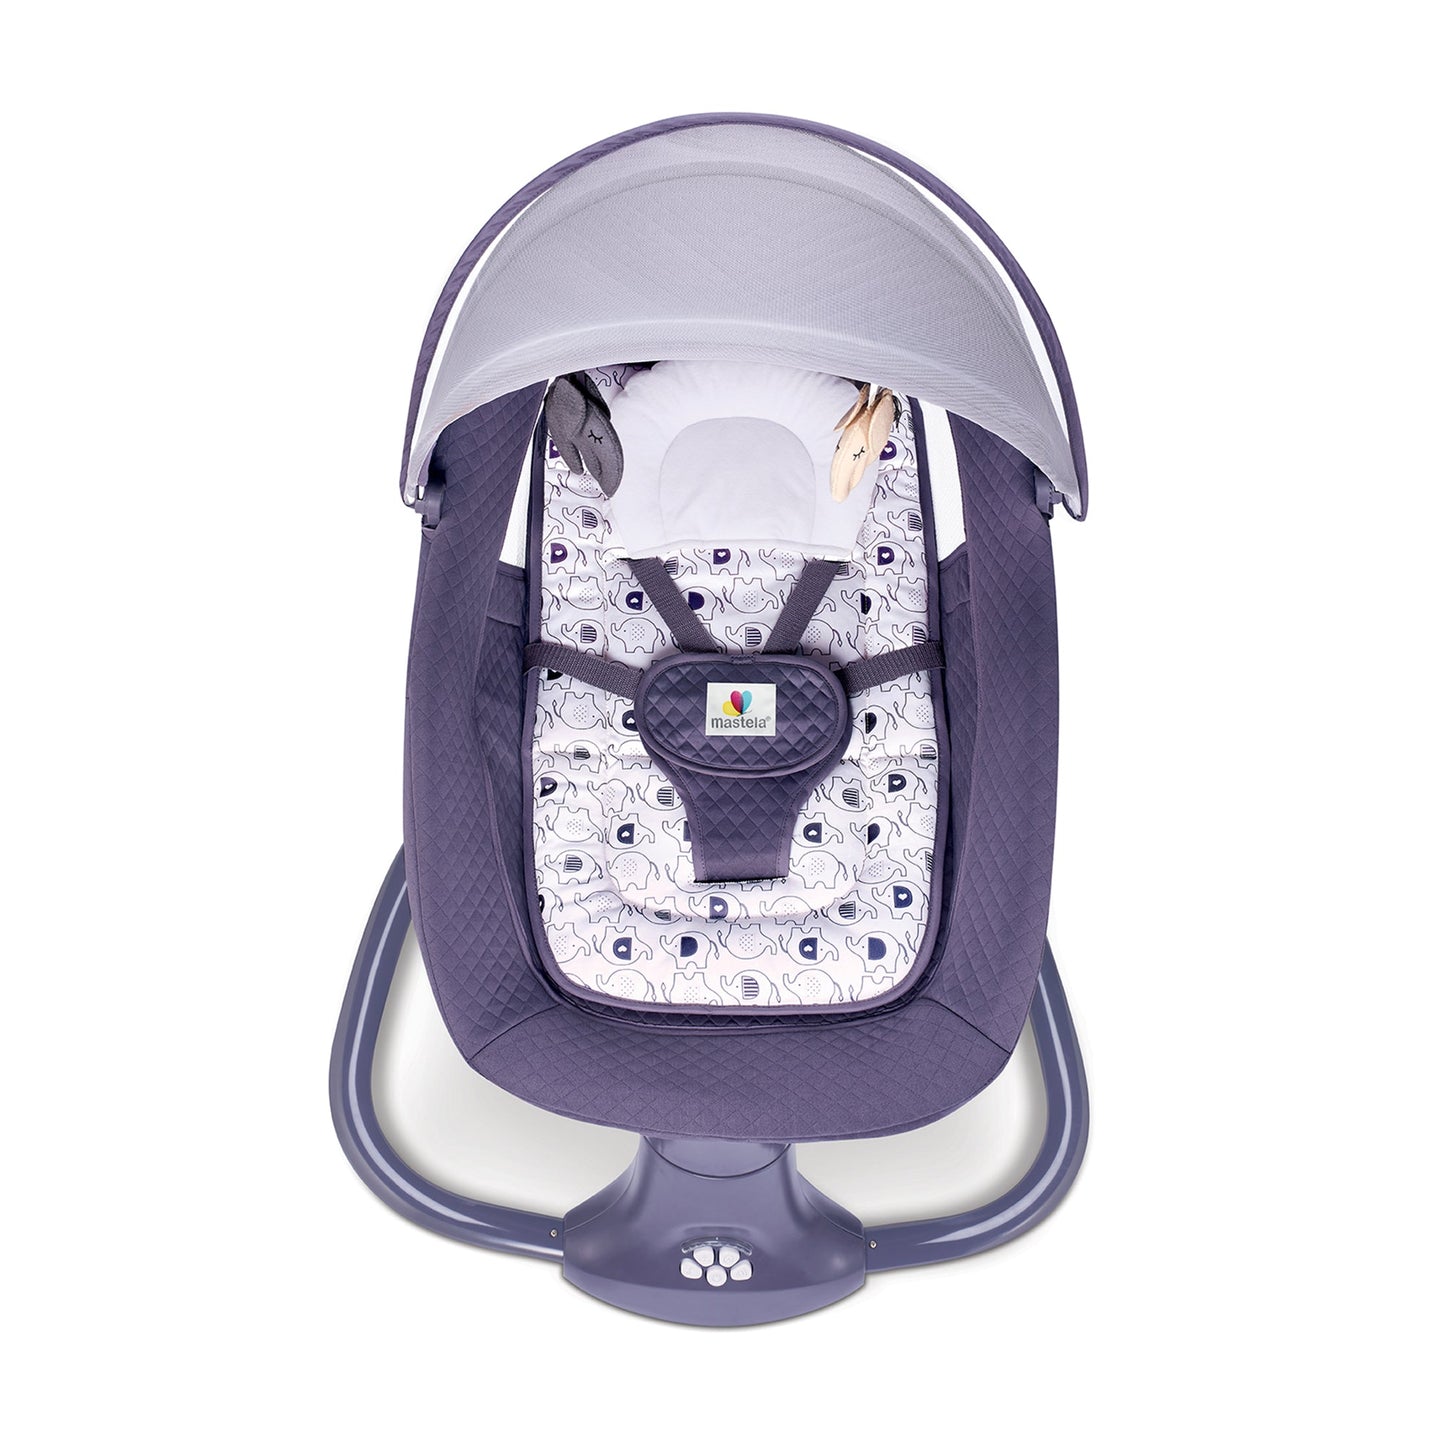 Mastela Deluxe 3in1 Swing Grey (Birth+ to 36 months)